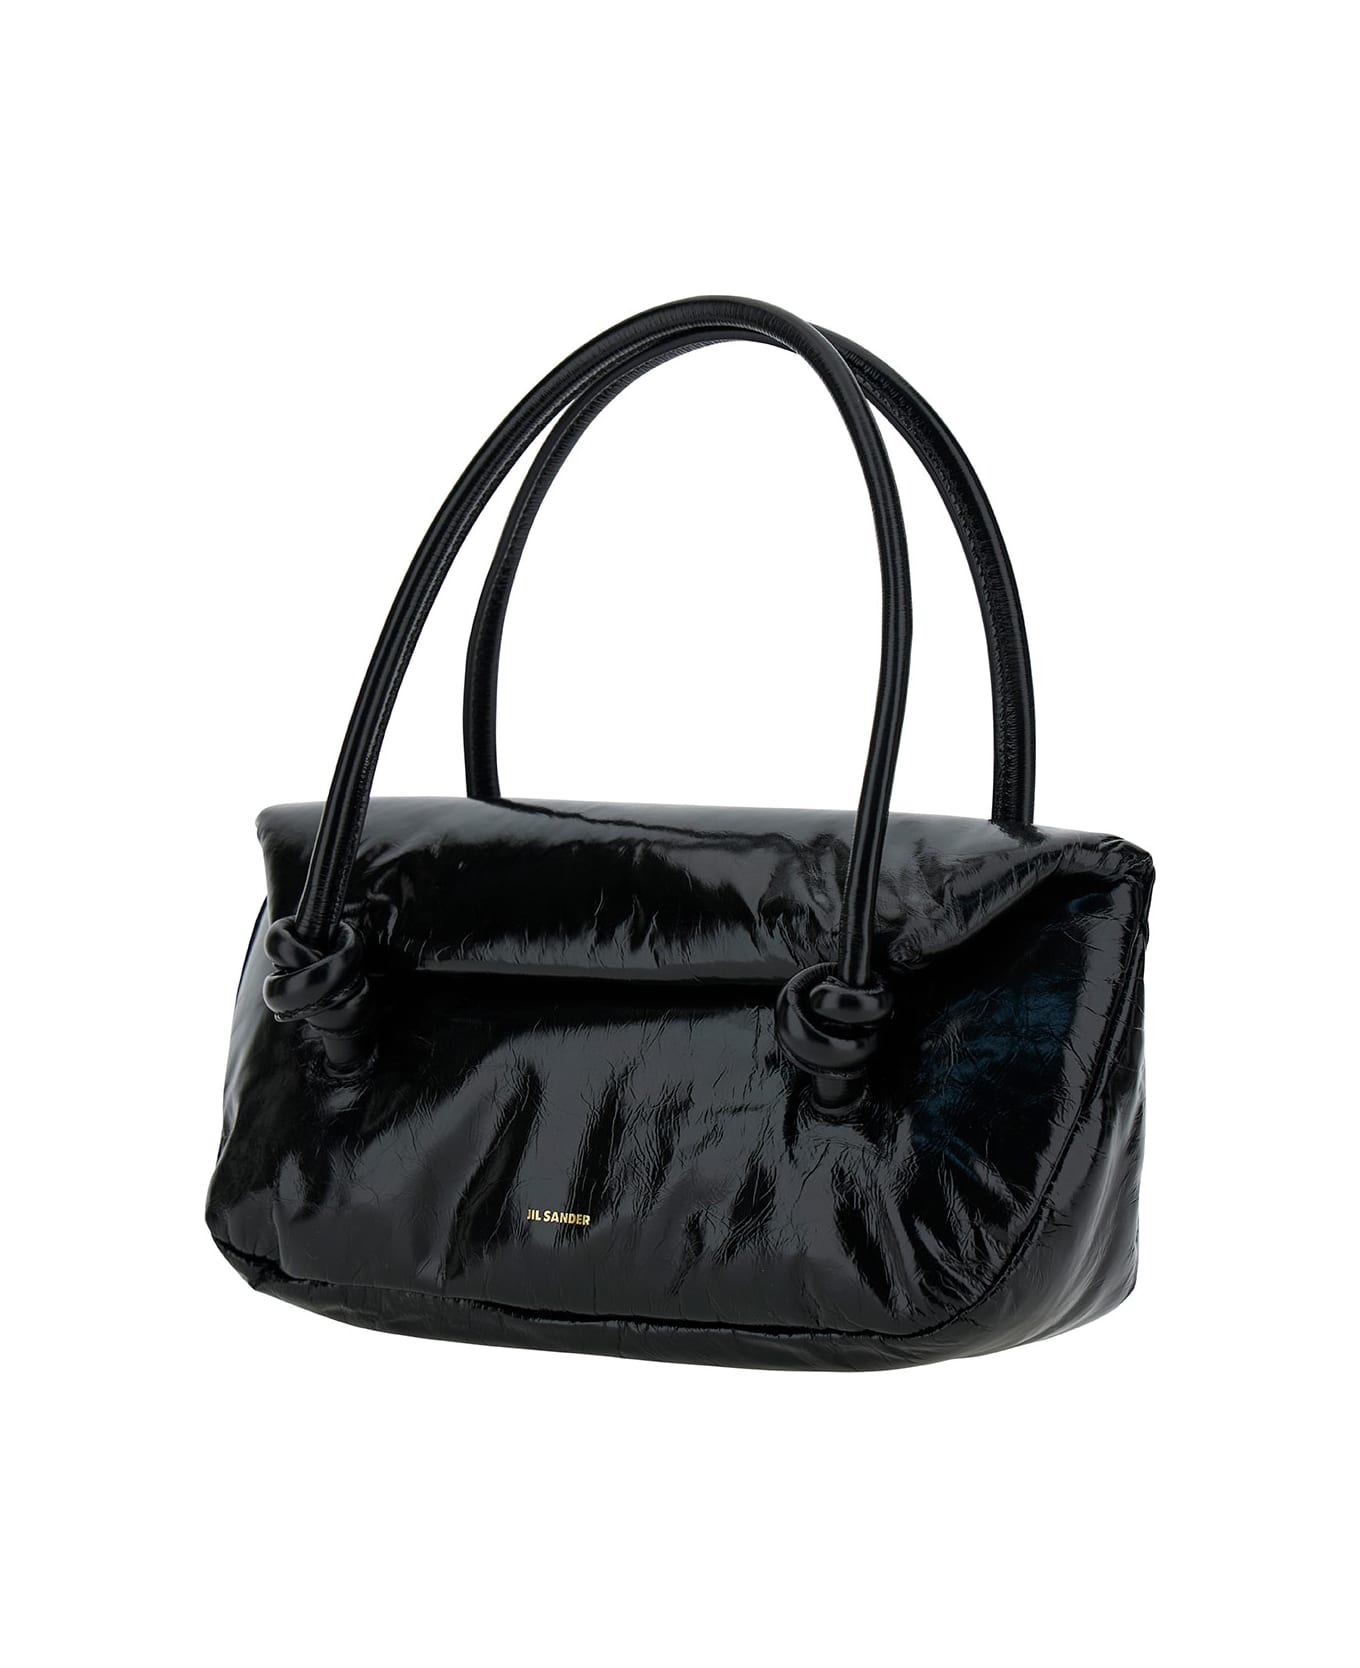 Jil Sander 'knot Small' Black Shoulder Bag With Laminated Logo In Patent Leather Woman - Black トートバッグ